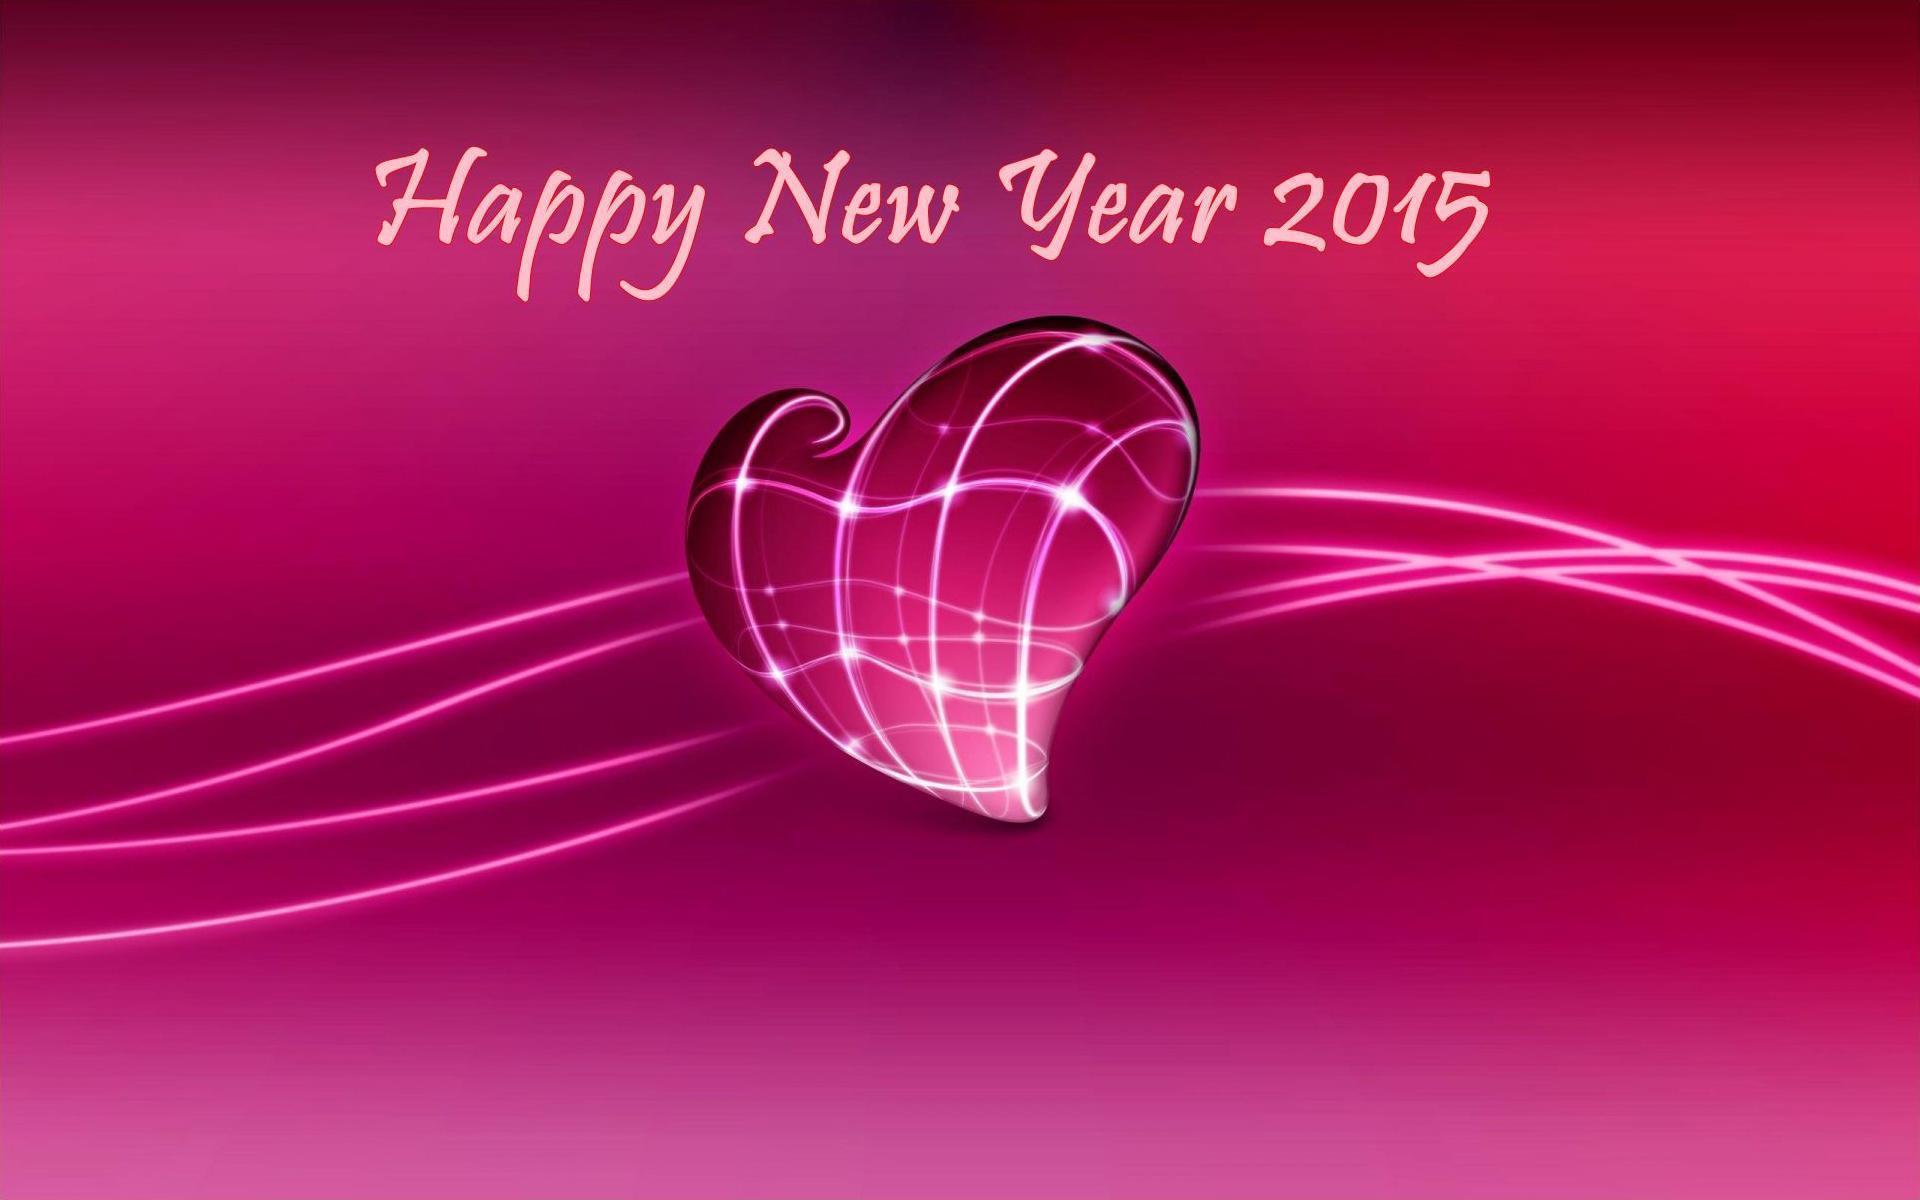 Love Wallpaper For New Year 2015